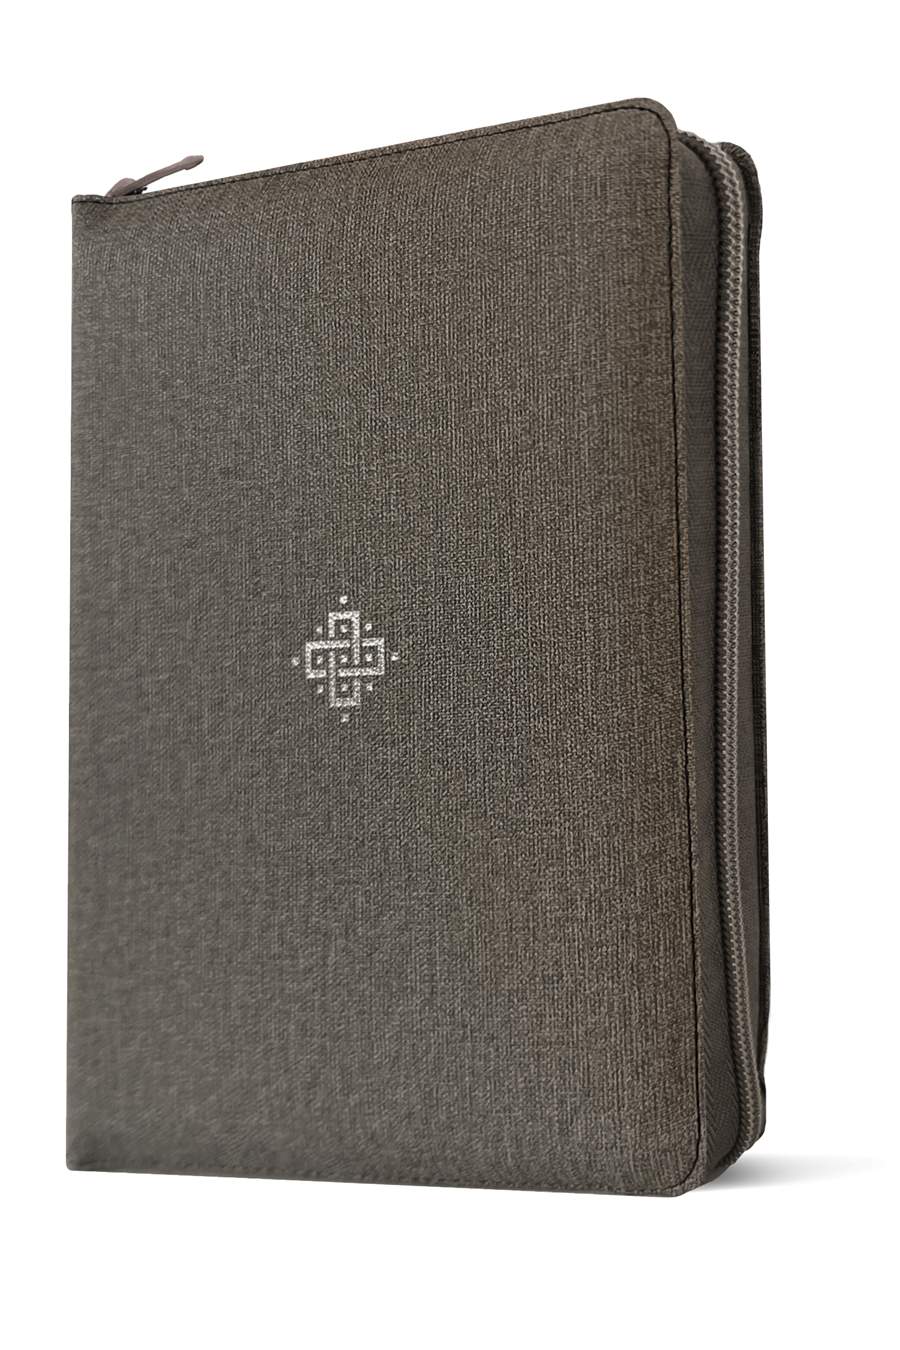 NLT Compact Giant Print Zipper Bible, Filament-Enabled Edition (LeatherLike, Woven Cross Gray, Red Letter)